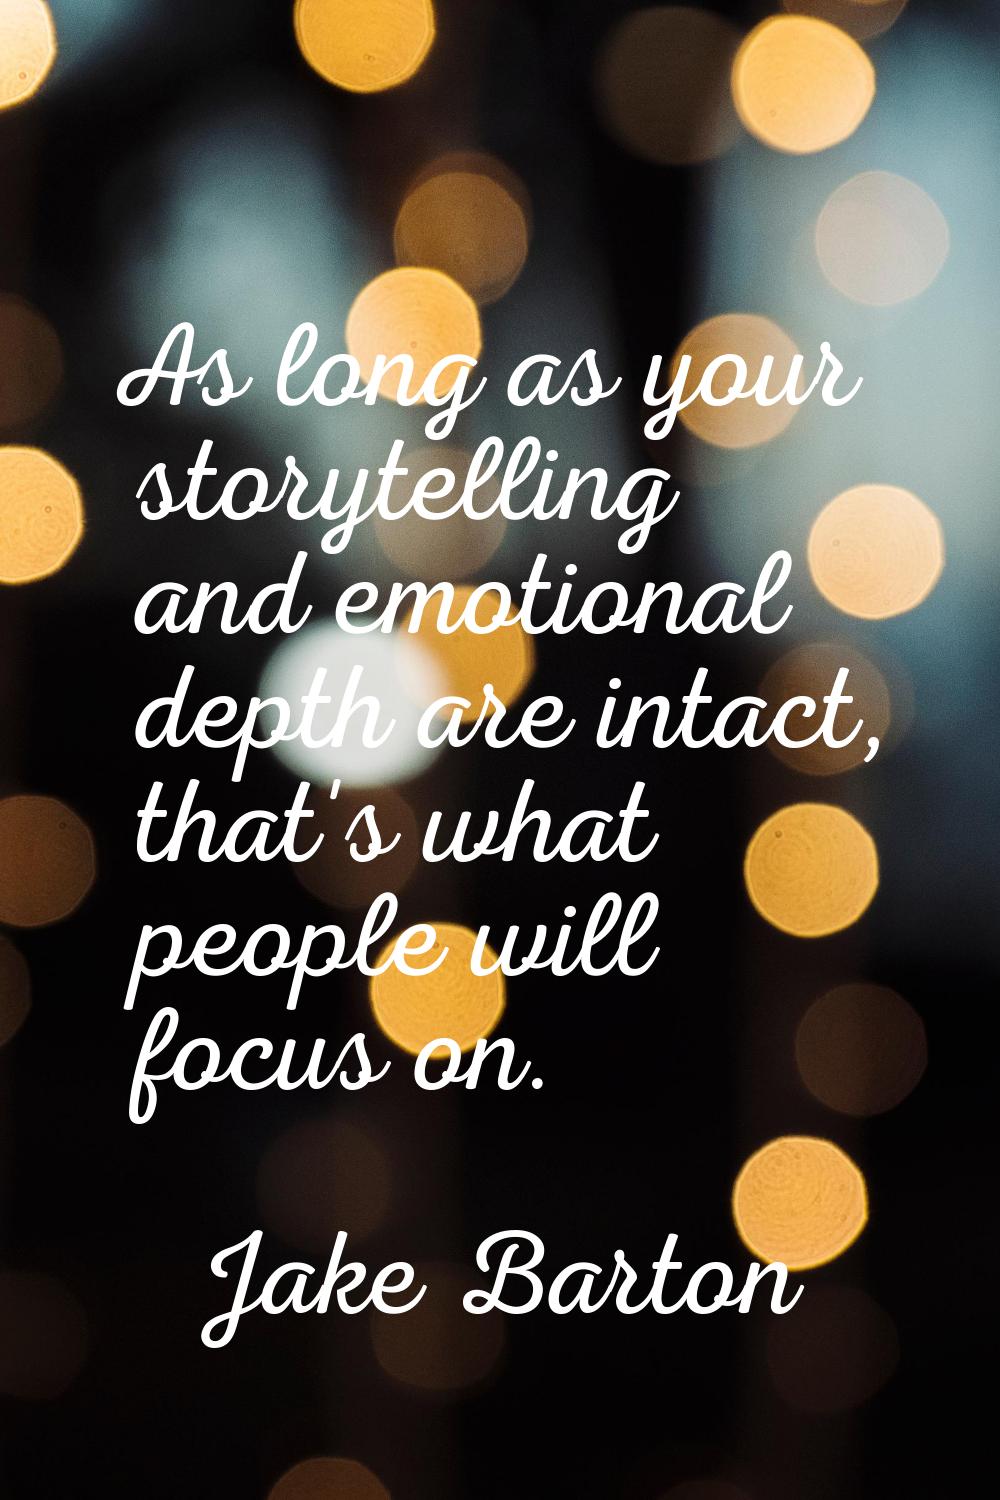 As long as your storytelling and emotional depth are intact, that's what people will focus on.